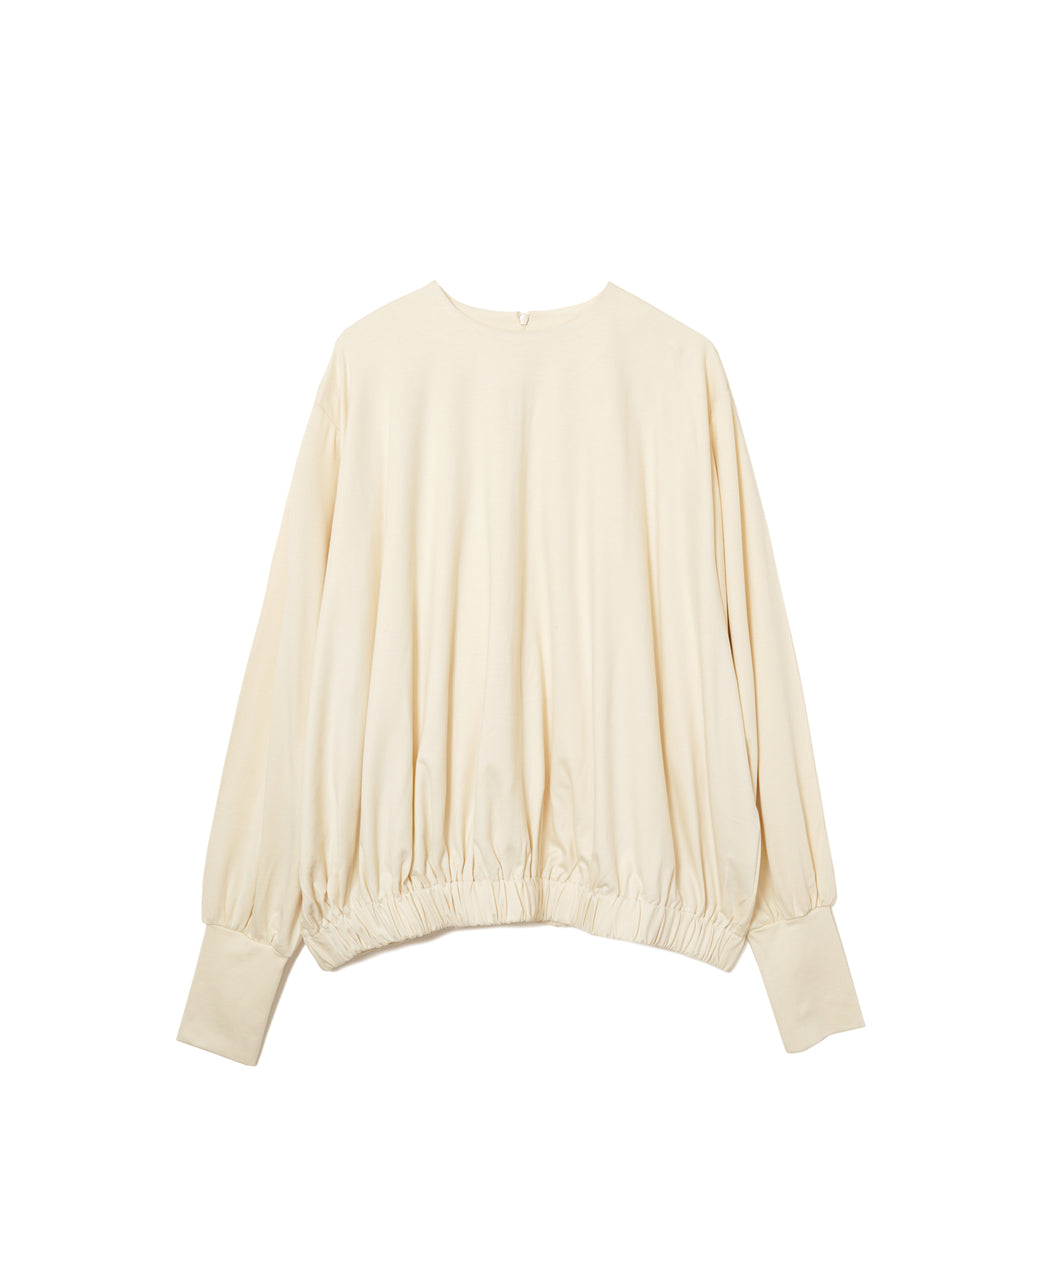 【WOMEN】THE FLATS DOLMAN SLEEVE PULL OVER